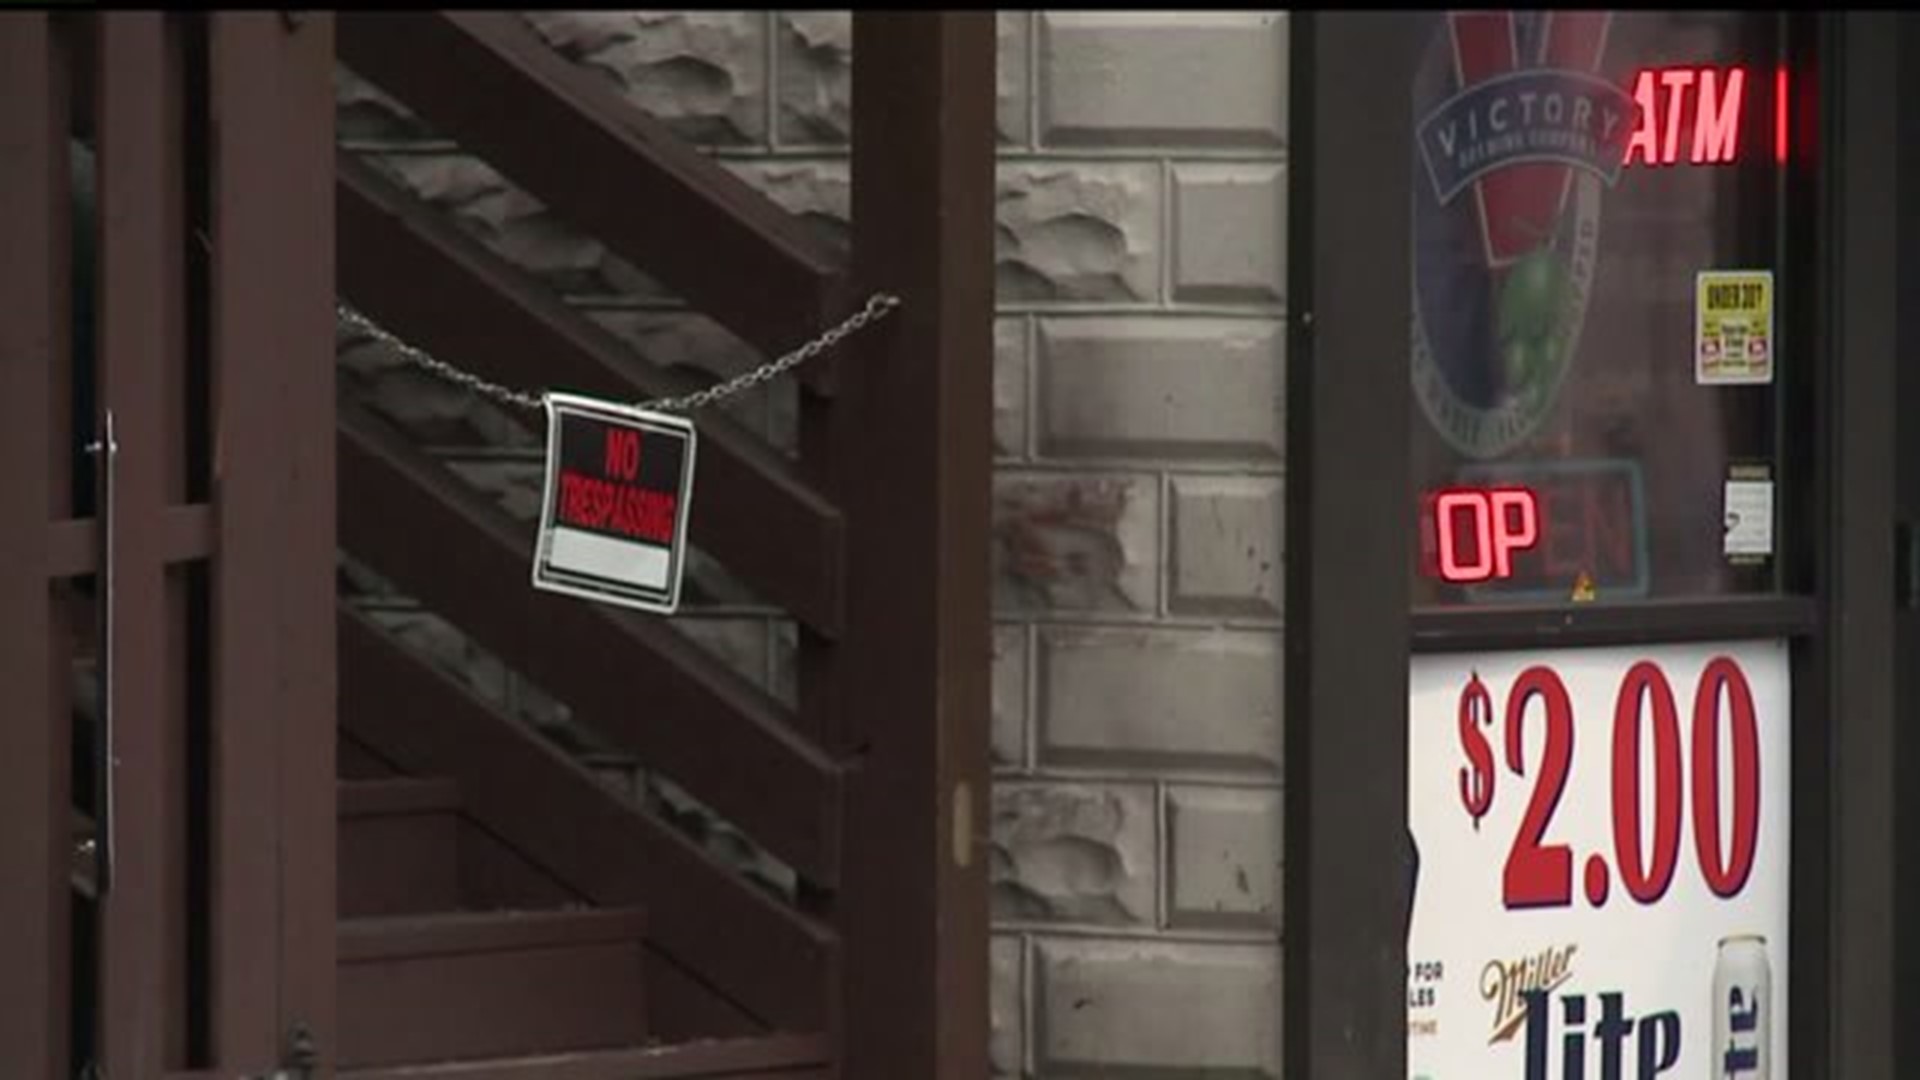 LANCASTER PUB OWNER AND 4 OTHERS CHARGED WITH ASSAULT